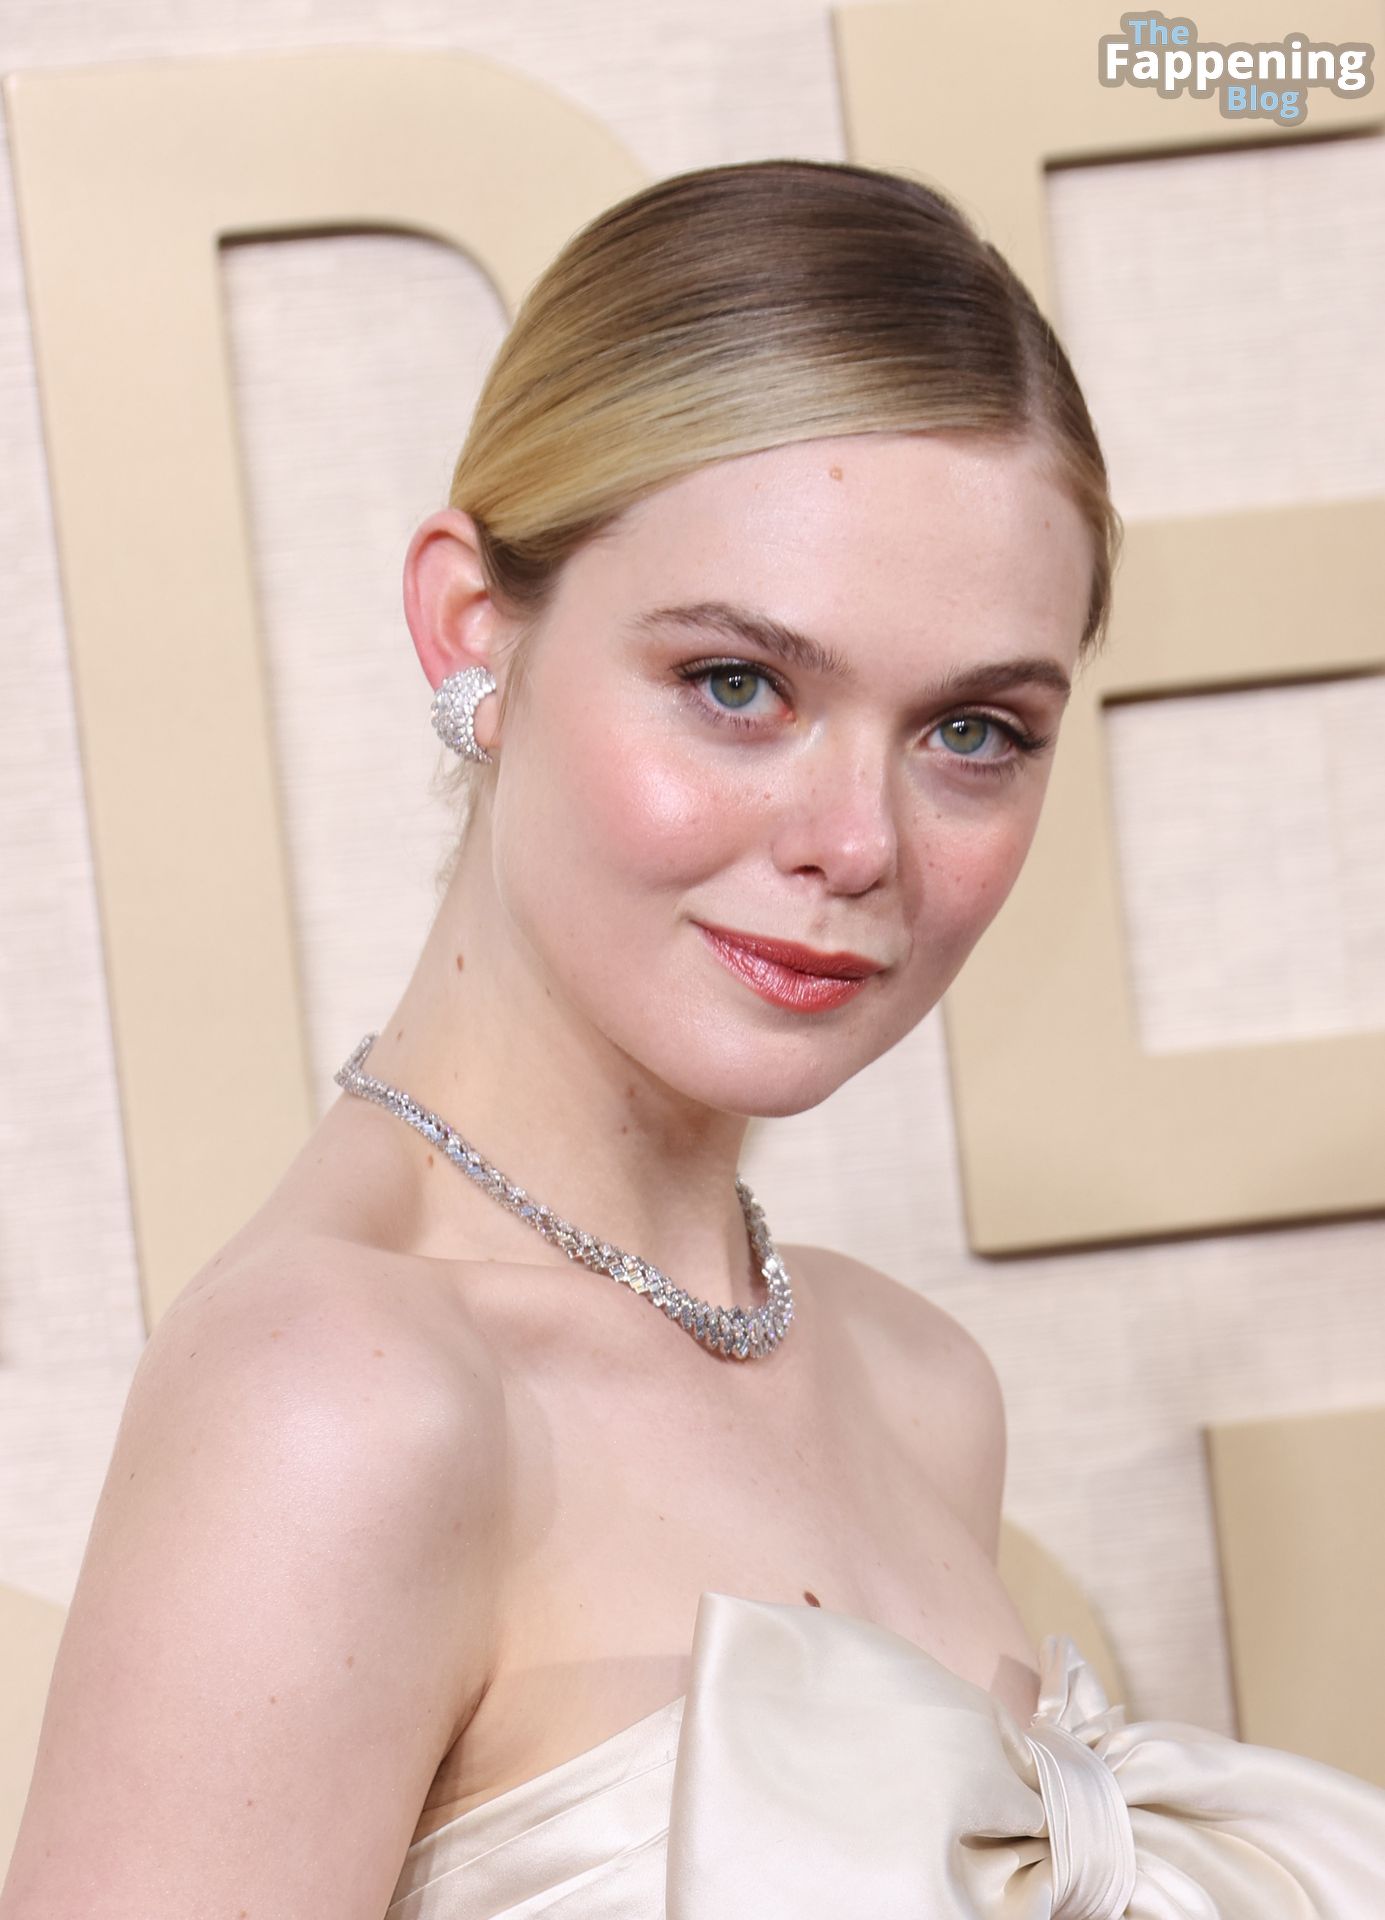 Elle-Fanning-Sexy-77-The-Fappening-Blog.jpg